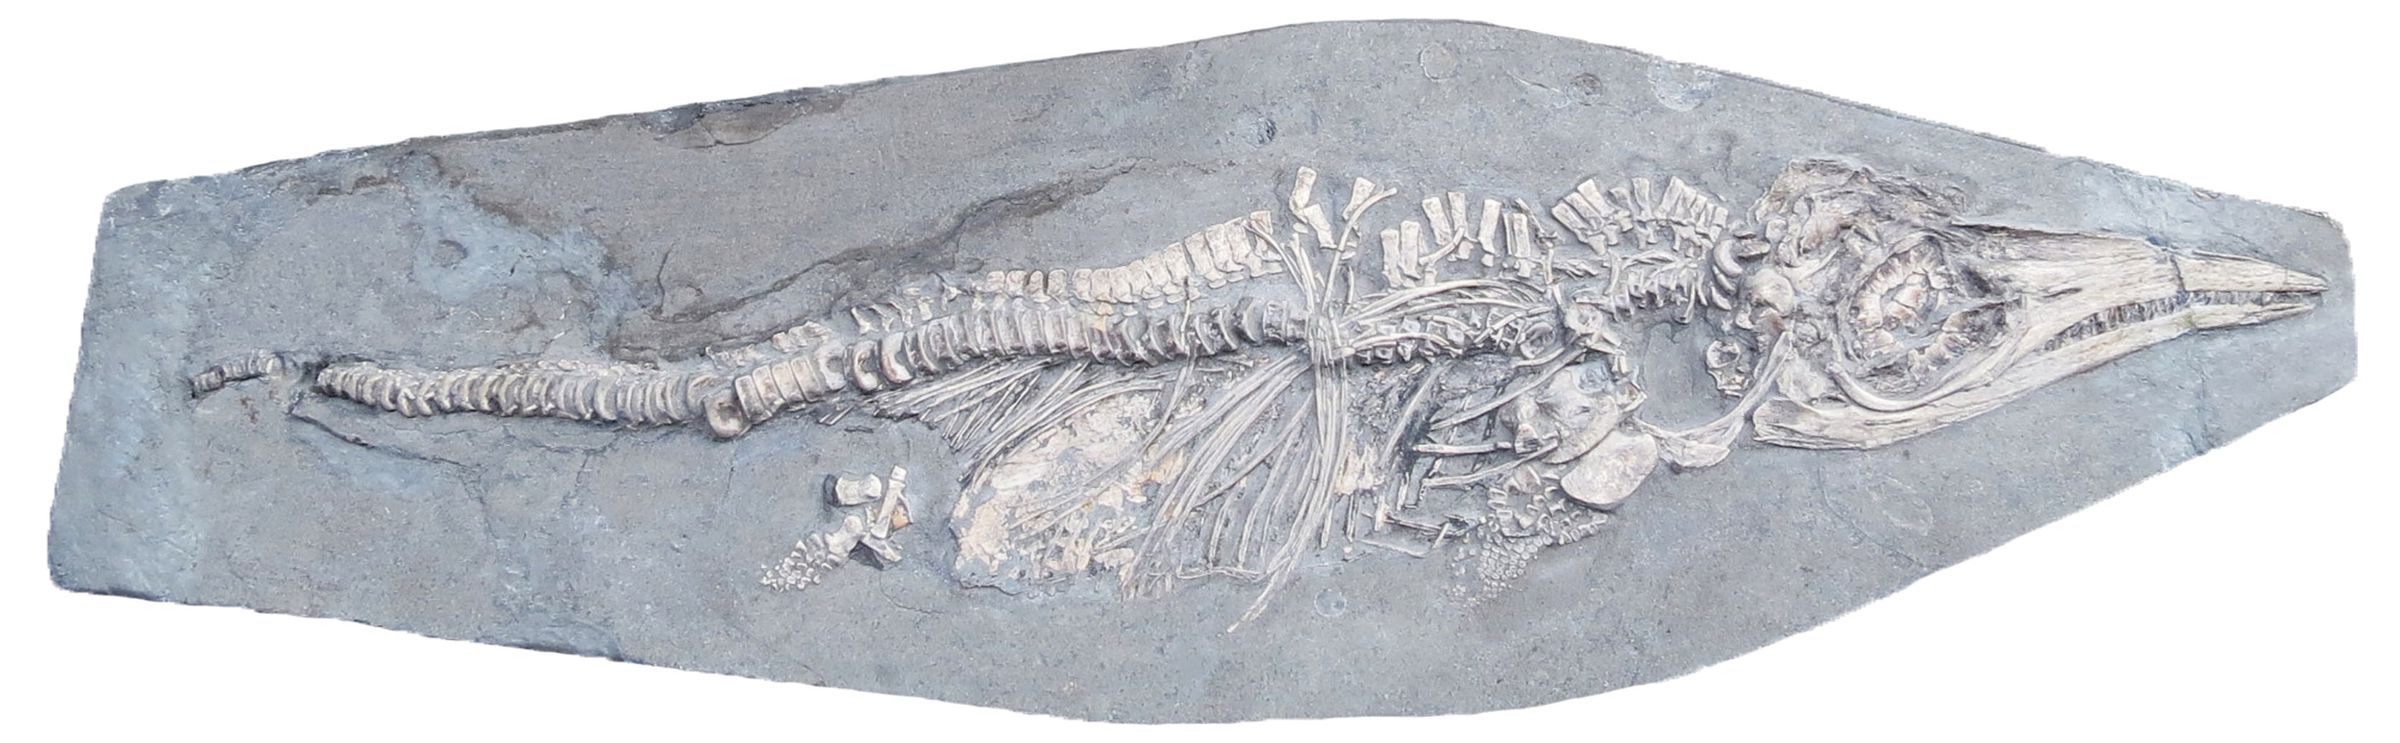 Baby Ichthyosaurus communis, with a belly full of squid hooklets.